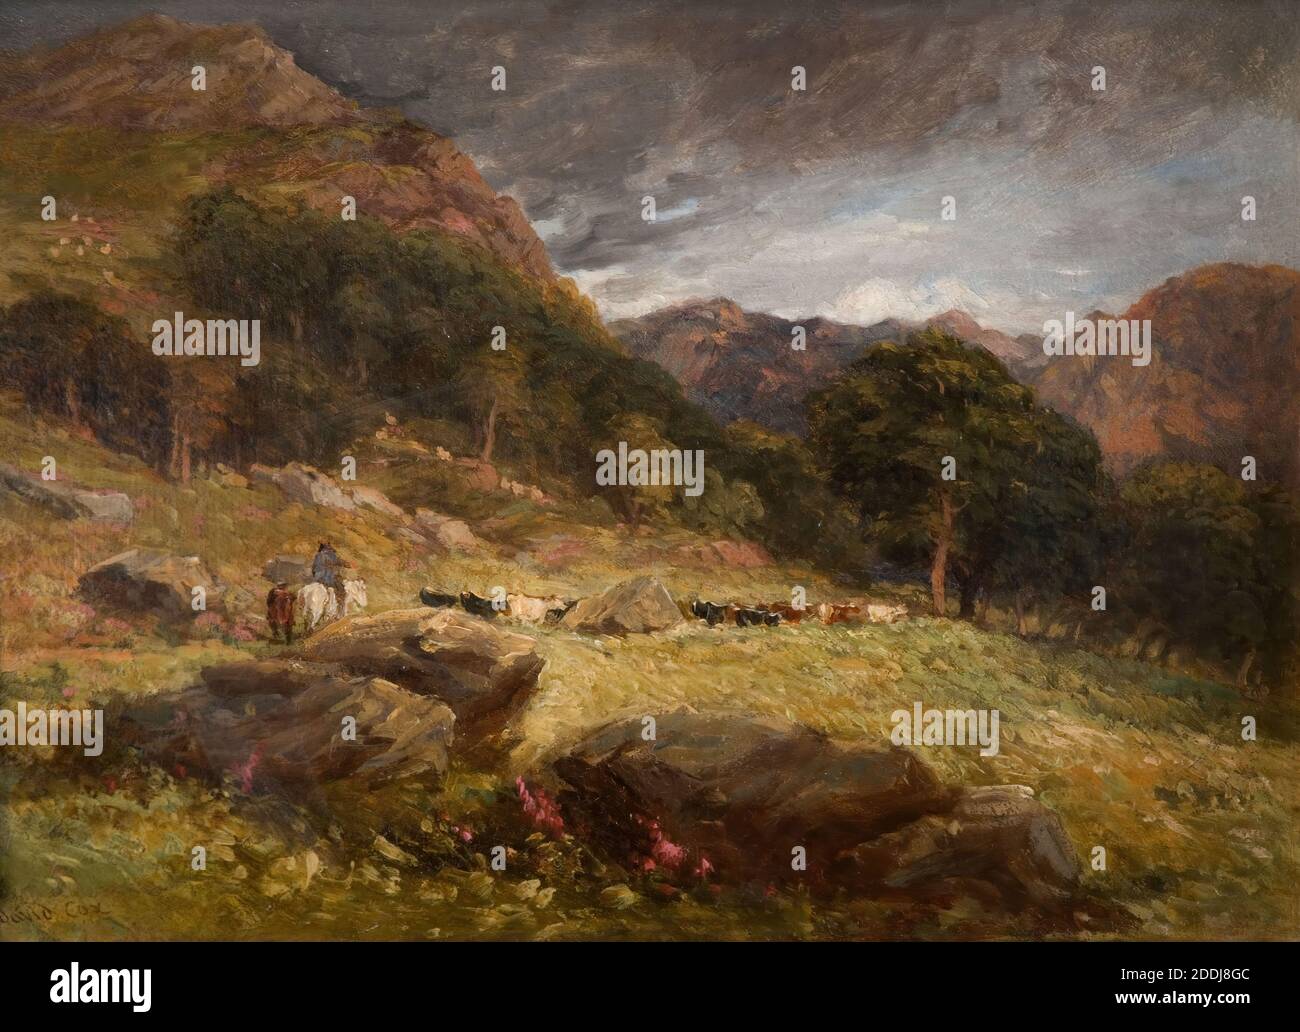 Driving Cattle, 1849 by David Cox, Landscape, English, Rural, Countryside Foto Stock